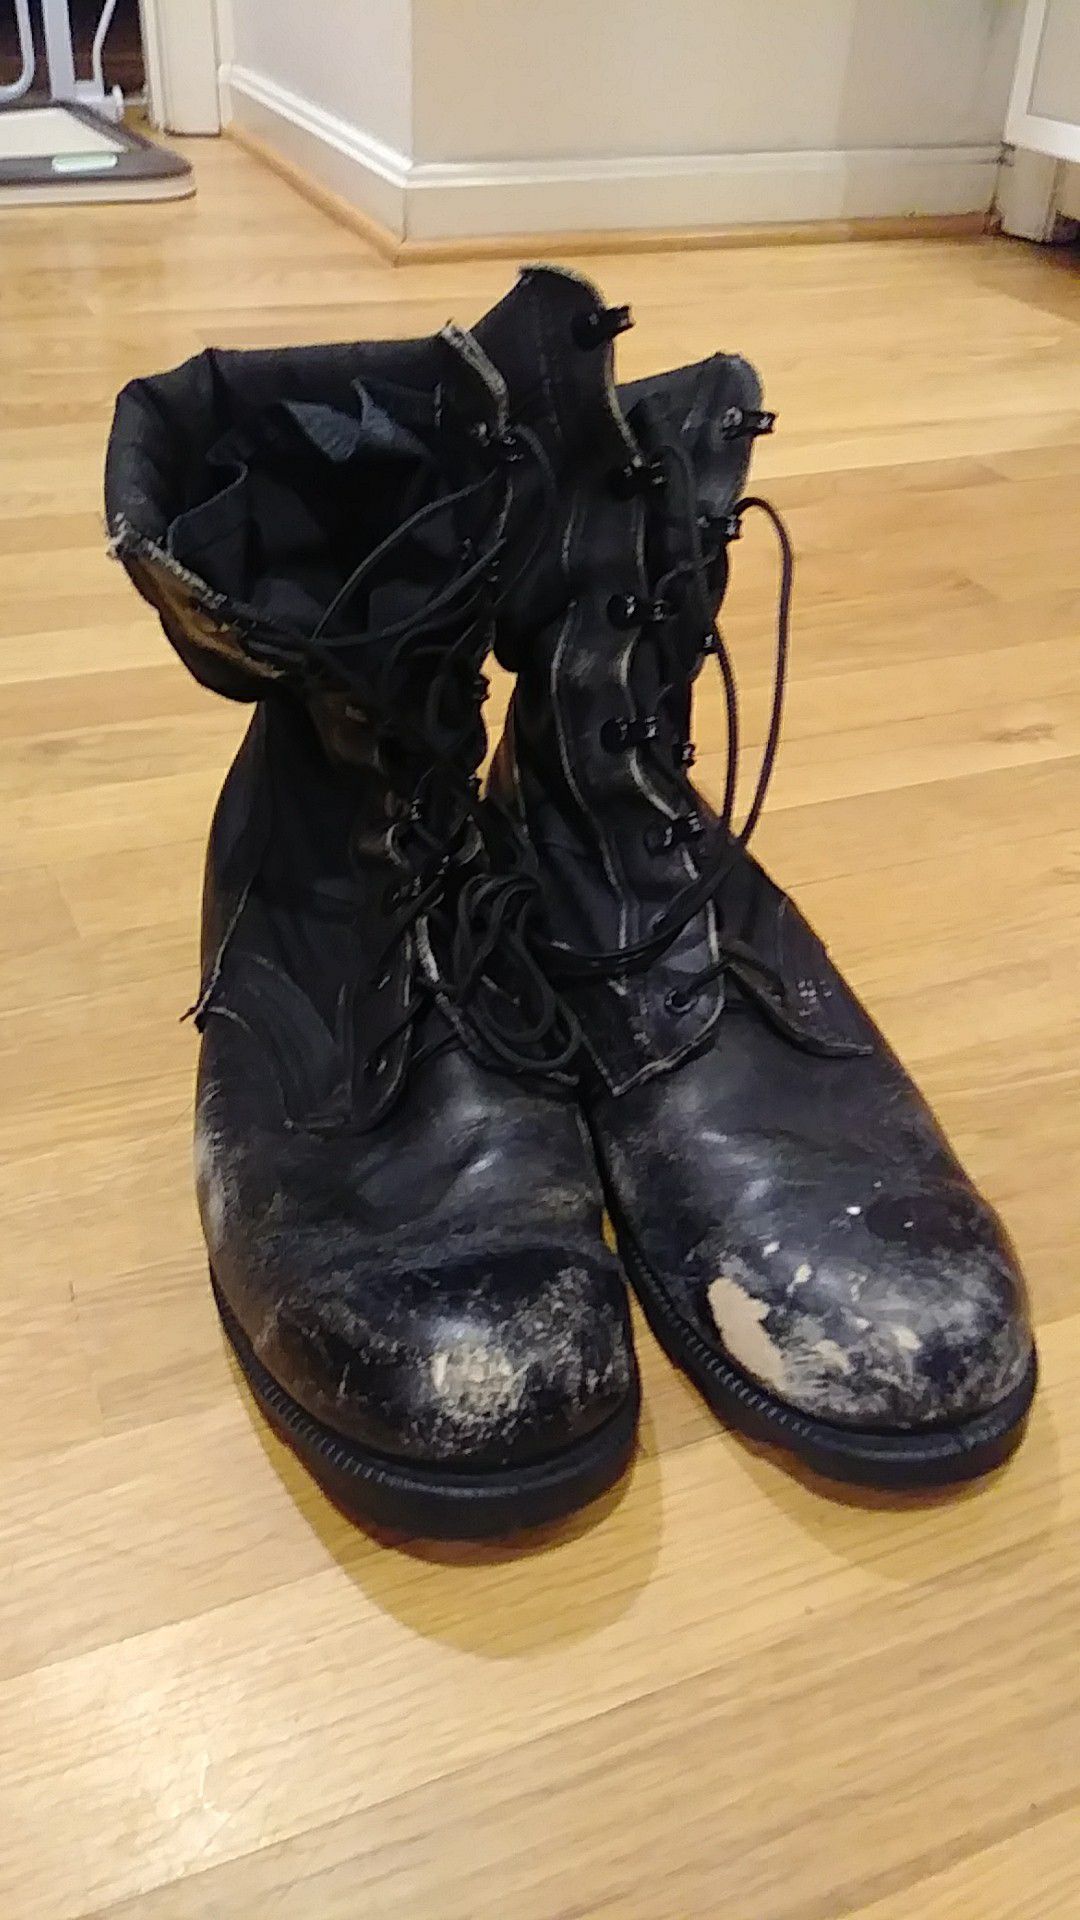 Free Combat Boots size 10.5